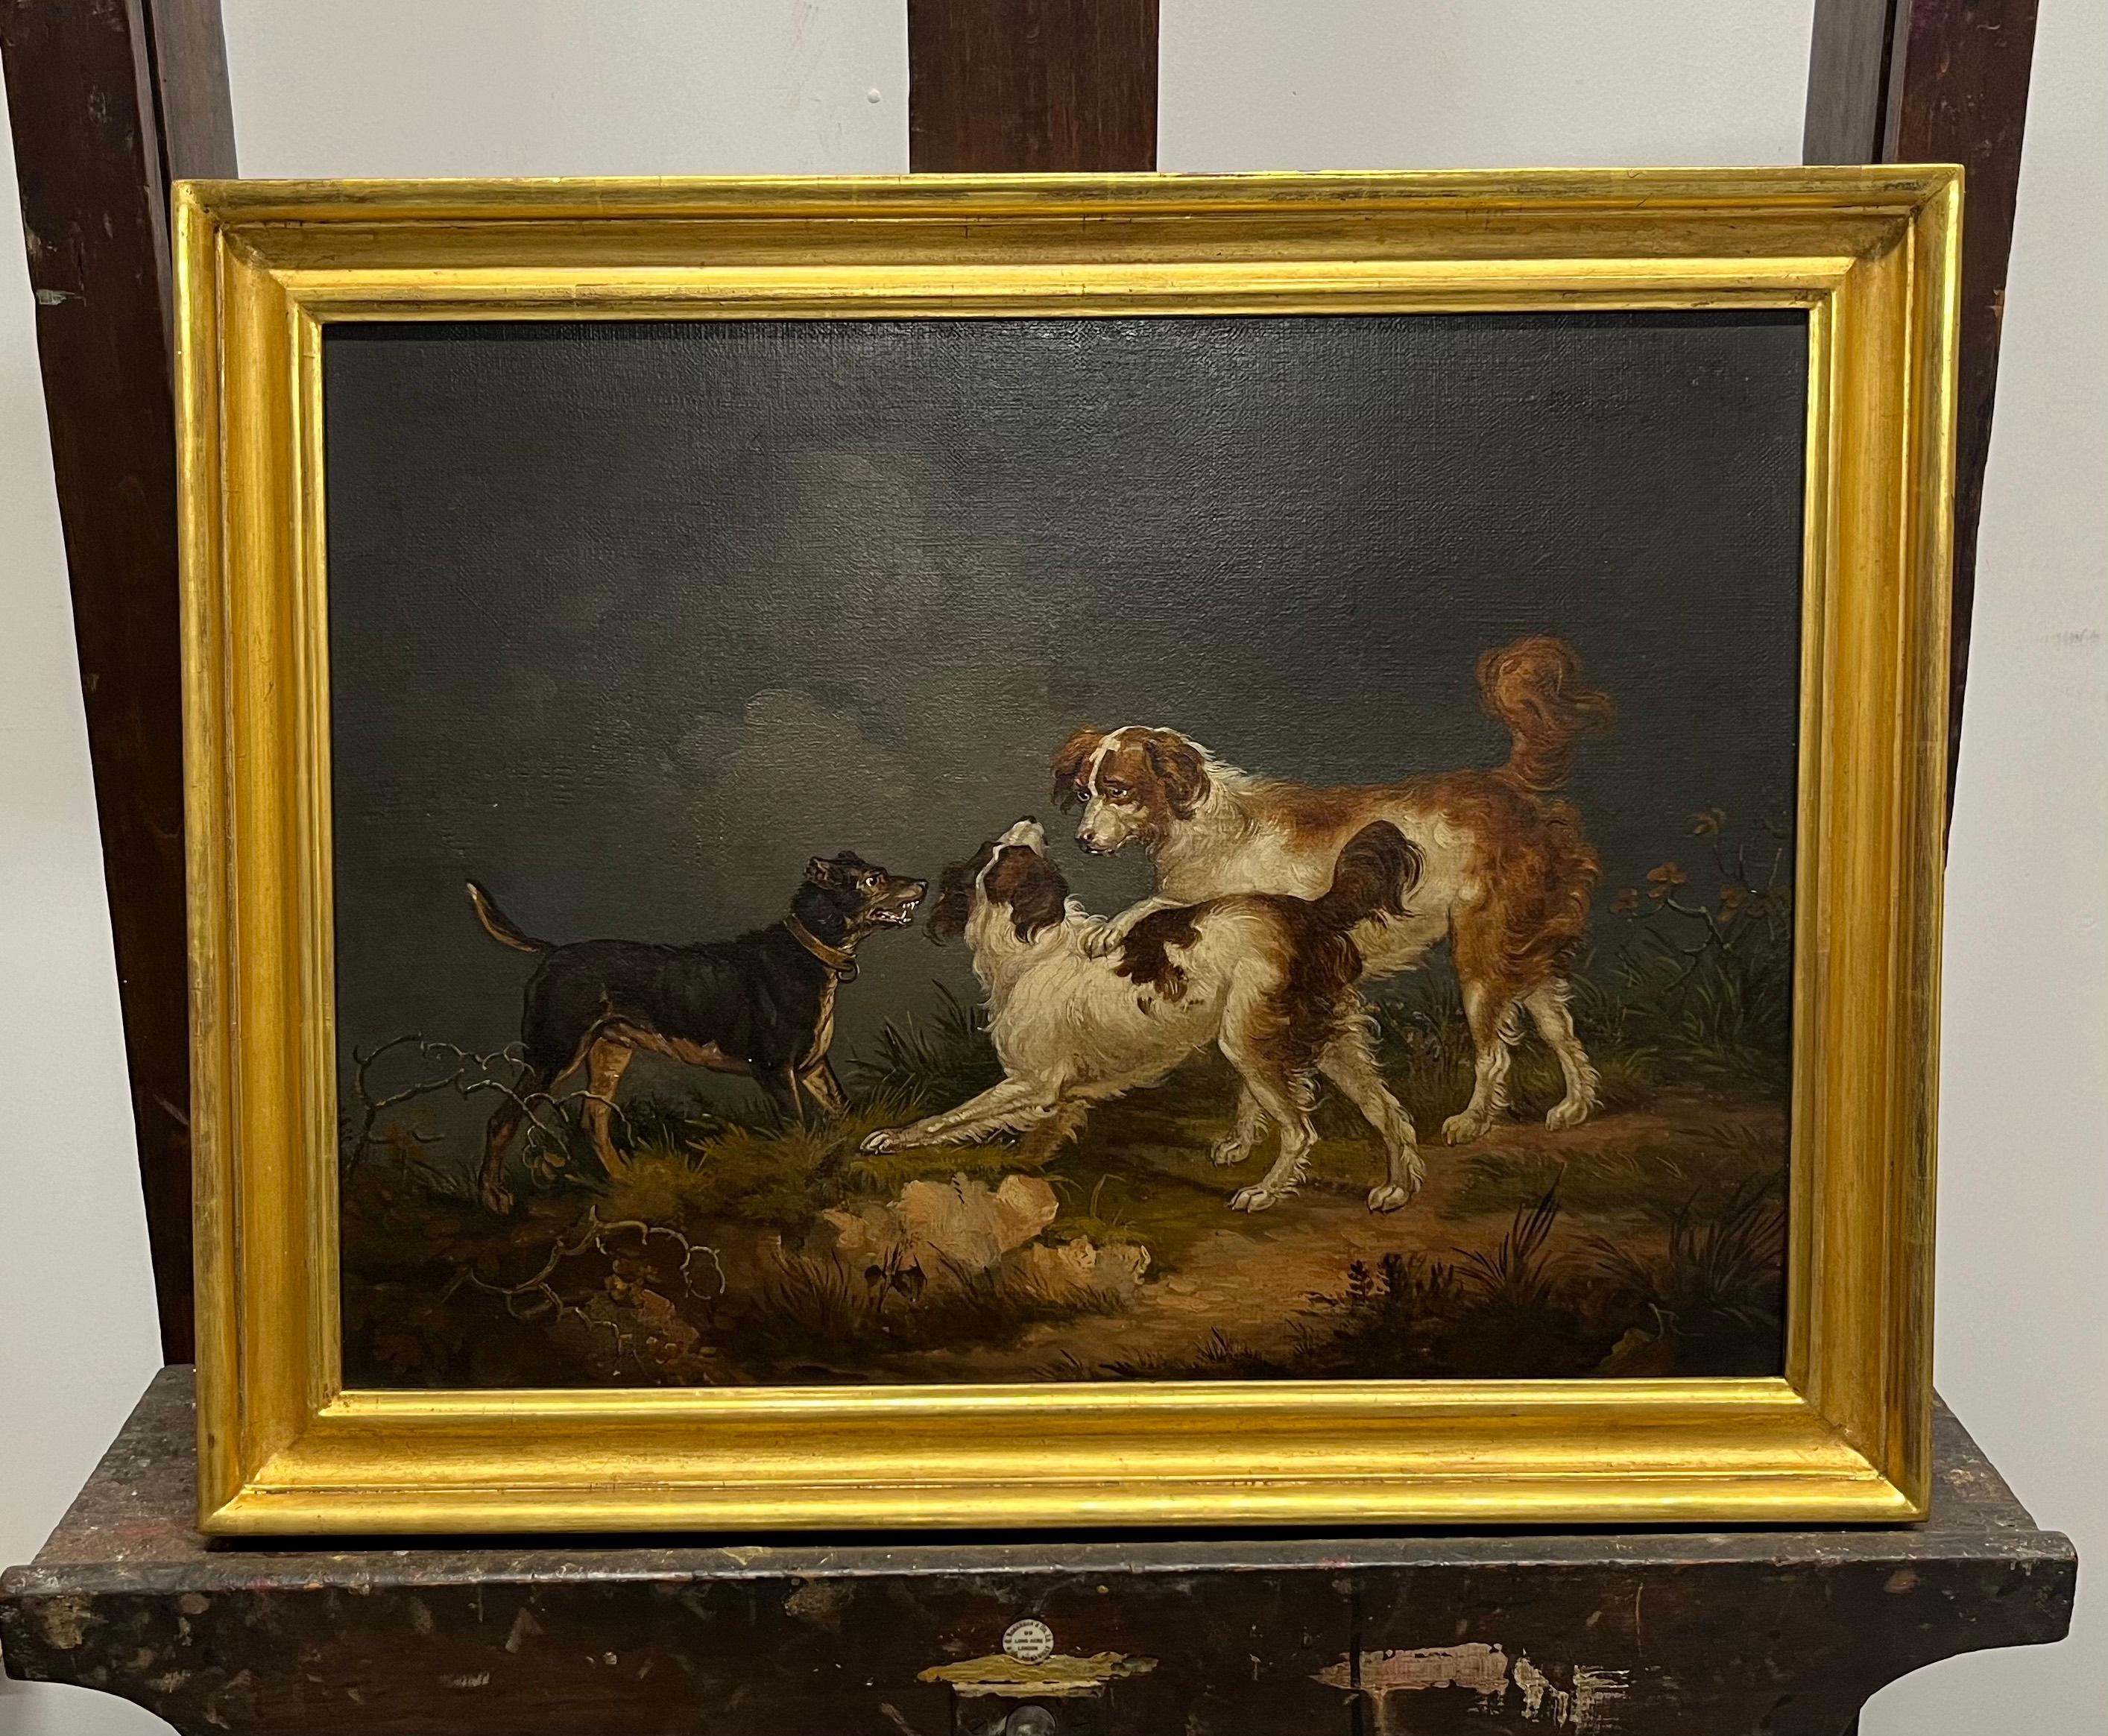 Edmund Bristow (1787-1876)
Spaniels and a terrier in a landscape
Oil on canvas
Canvas size 14 x 19 in
Framed size - 16 1/2 x 21 1/4

Edmund Bristow was born in Windsor on 1st April 1787 and spent his whole life there. He had a reputation as rather